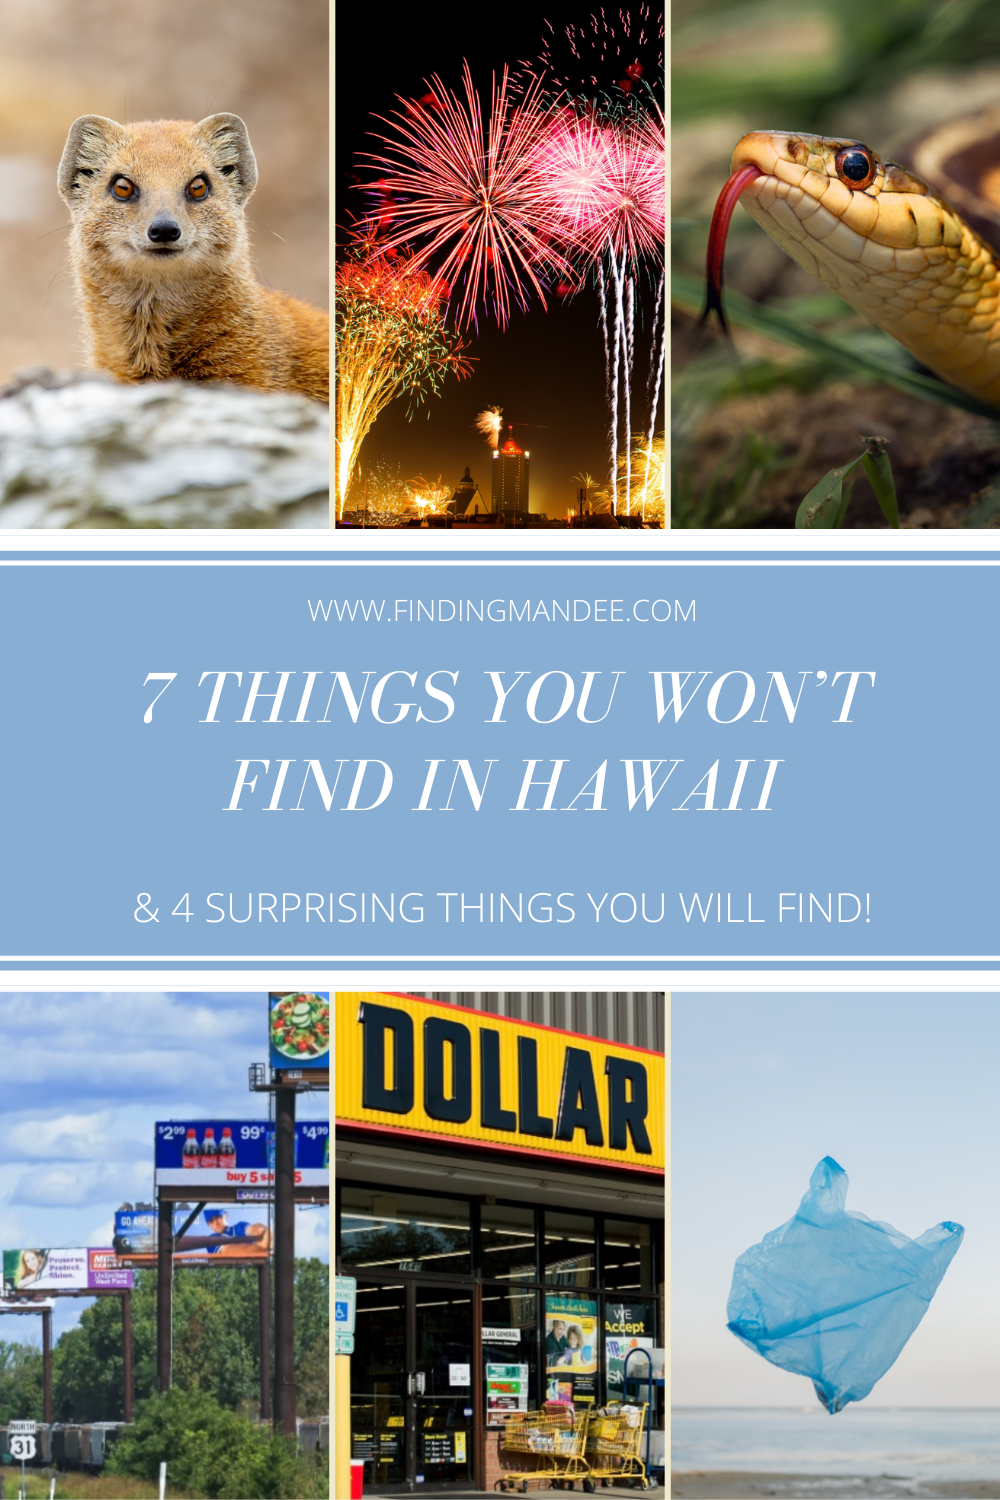 7 Things You Won't Find in Hawaii & 4 Surprising Things That You Will Find | Finding Mandee